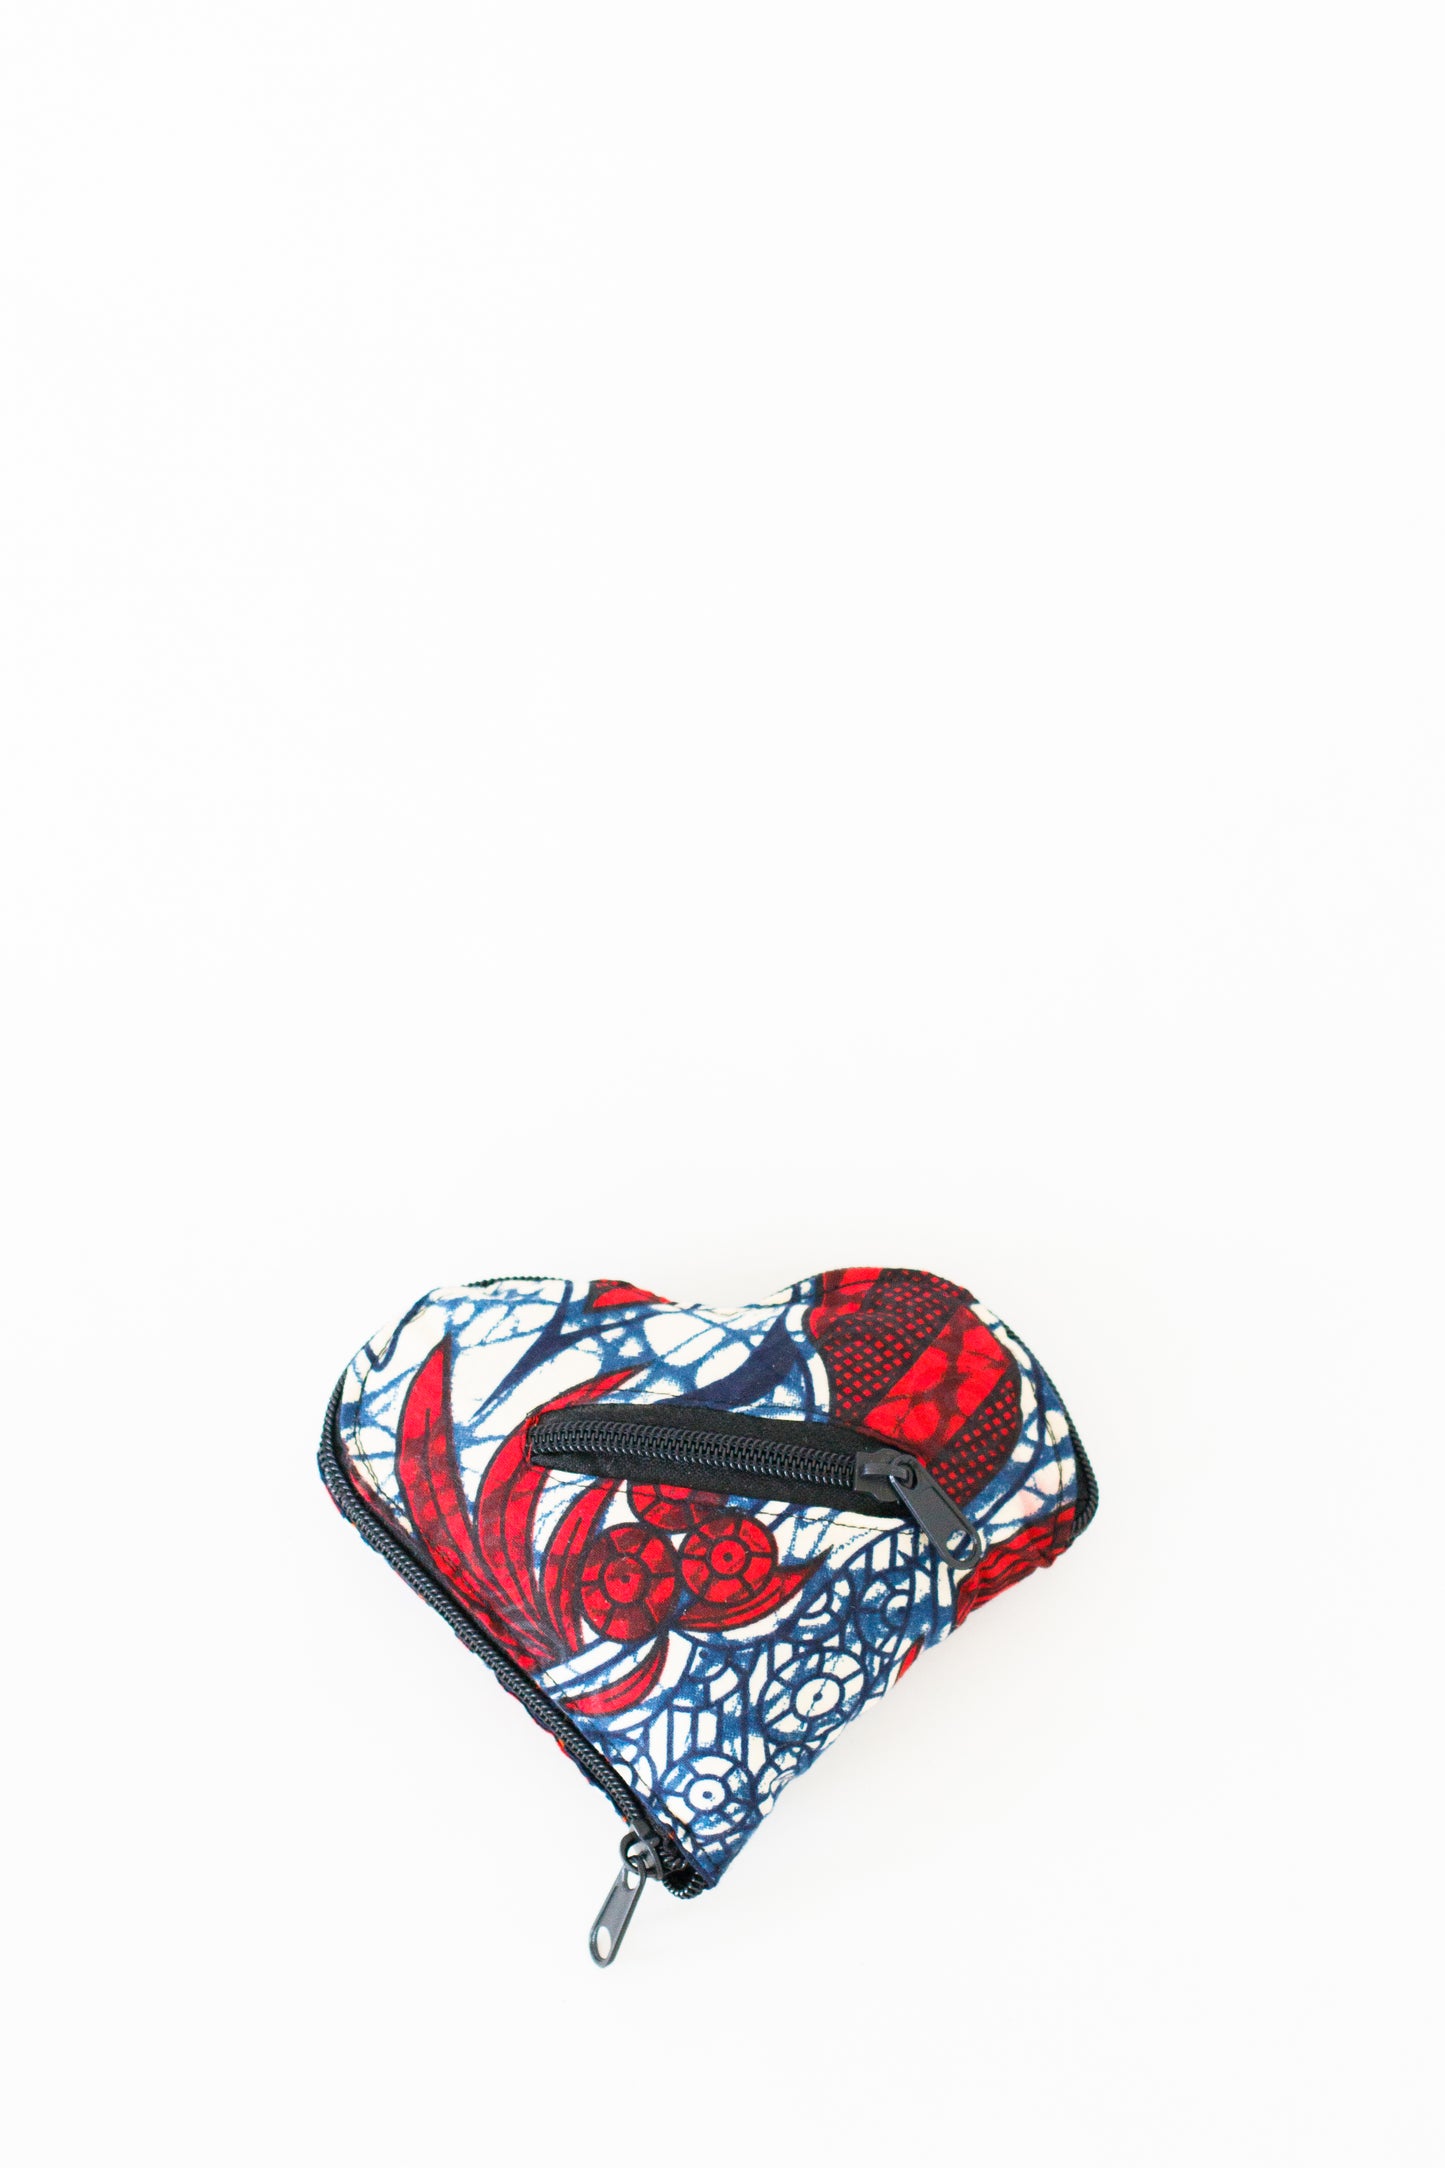 Expandable Heart Tote, Scarlet